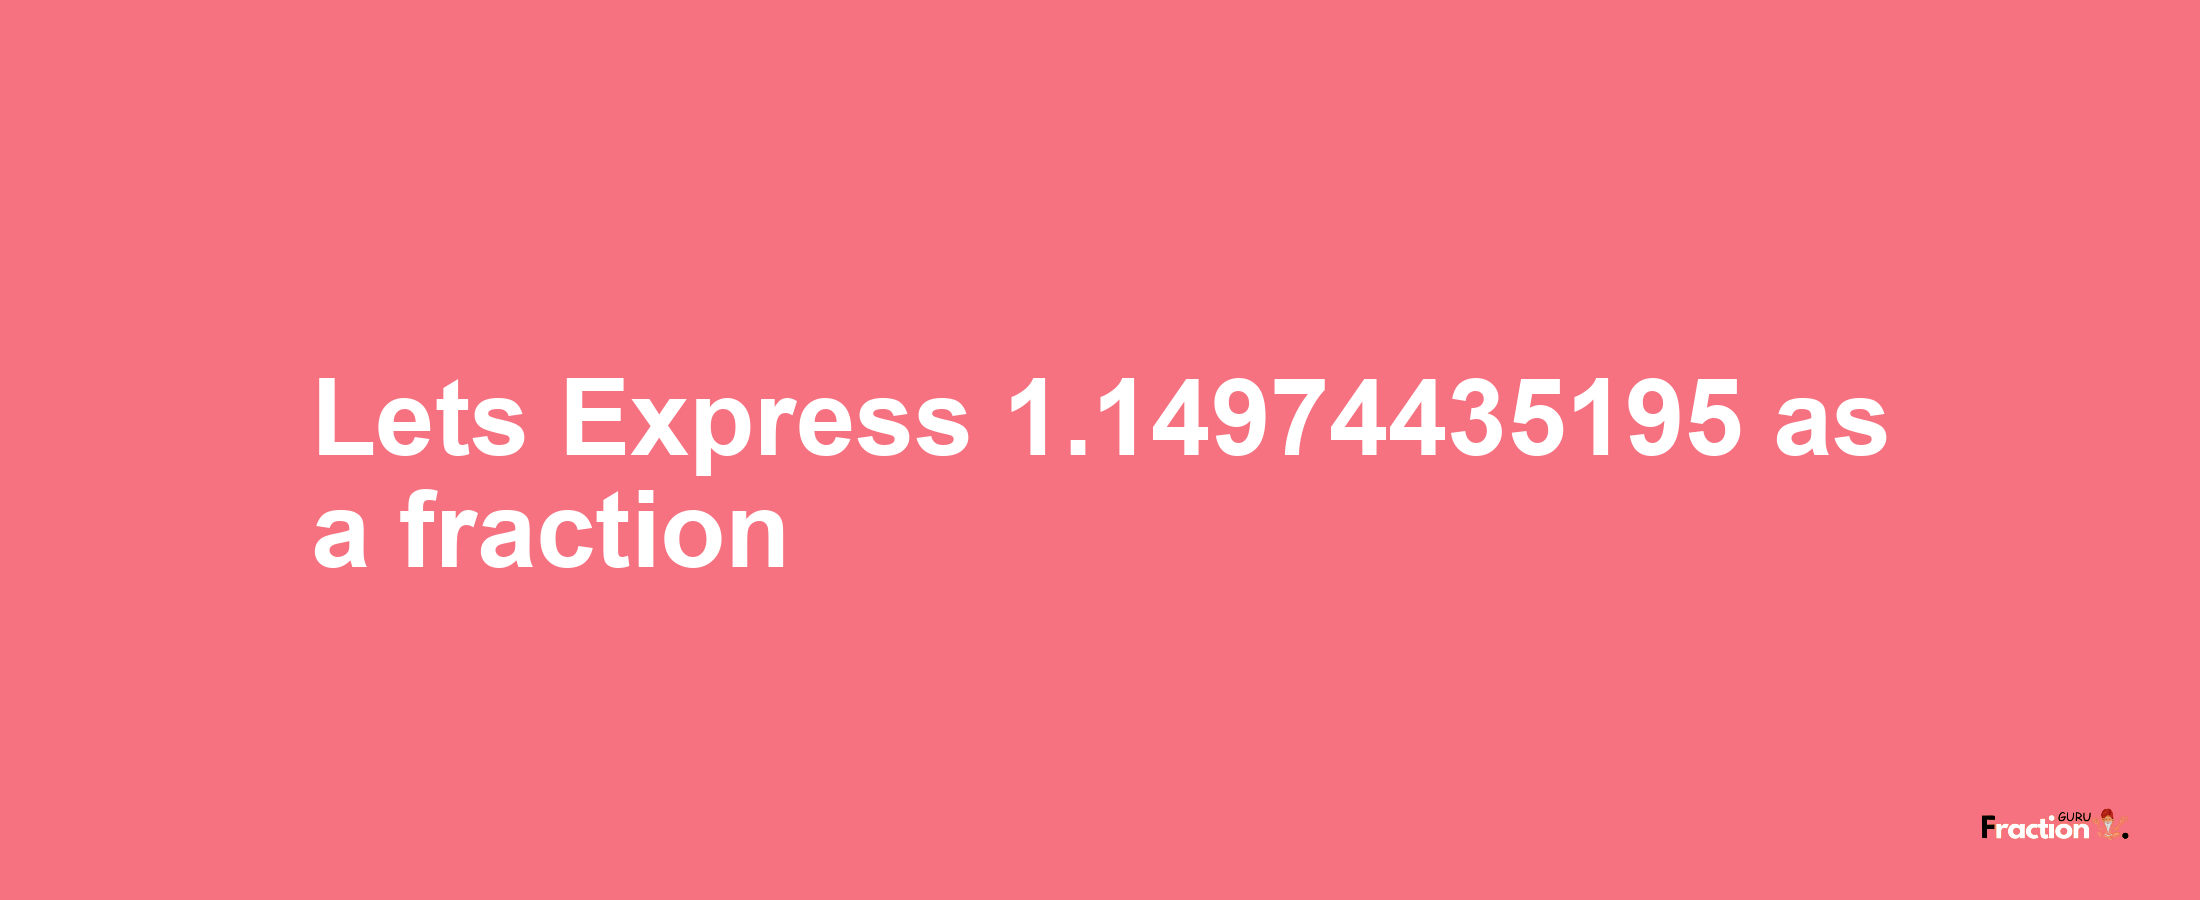 Lets Express 1.14974435195 as afraction